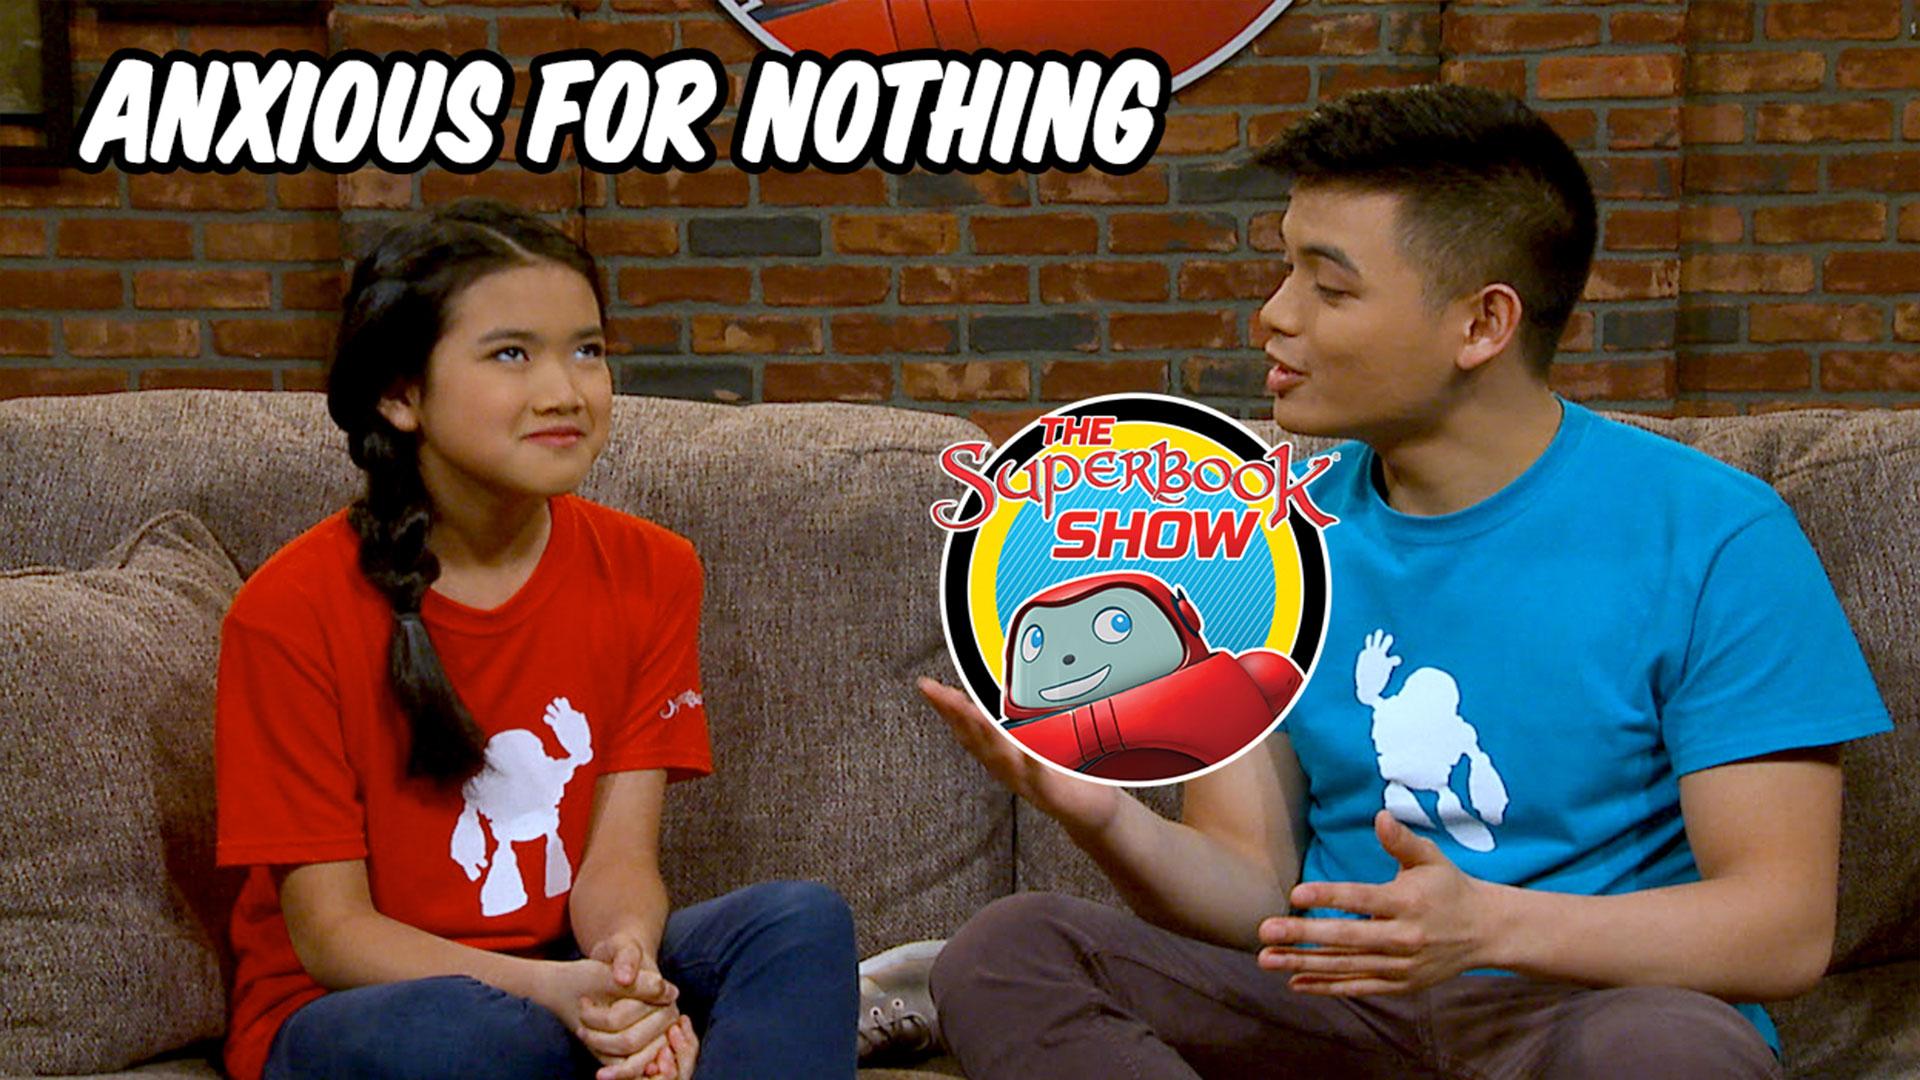 Anxious for Nothing - The Superbook Show